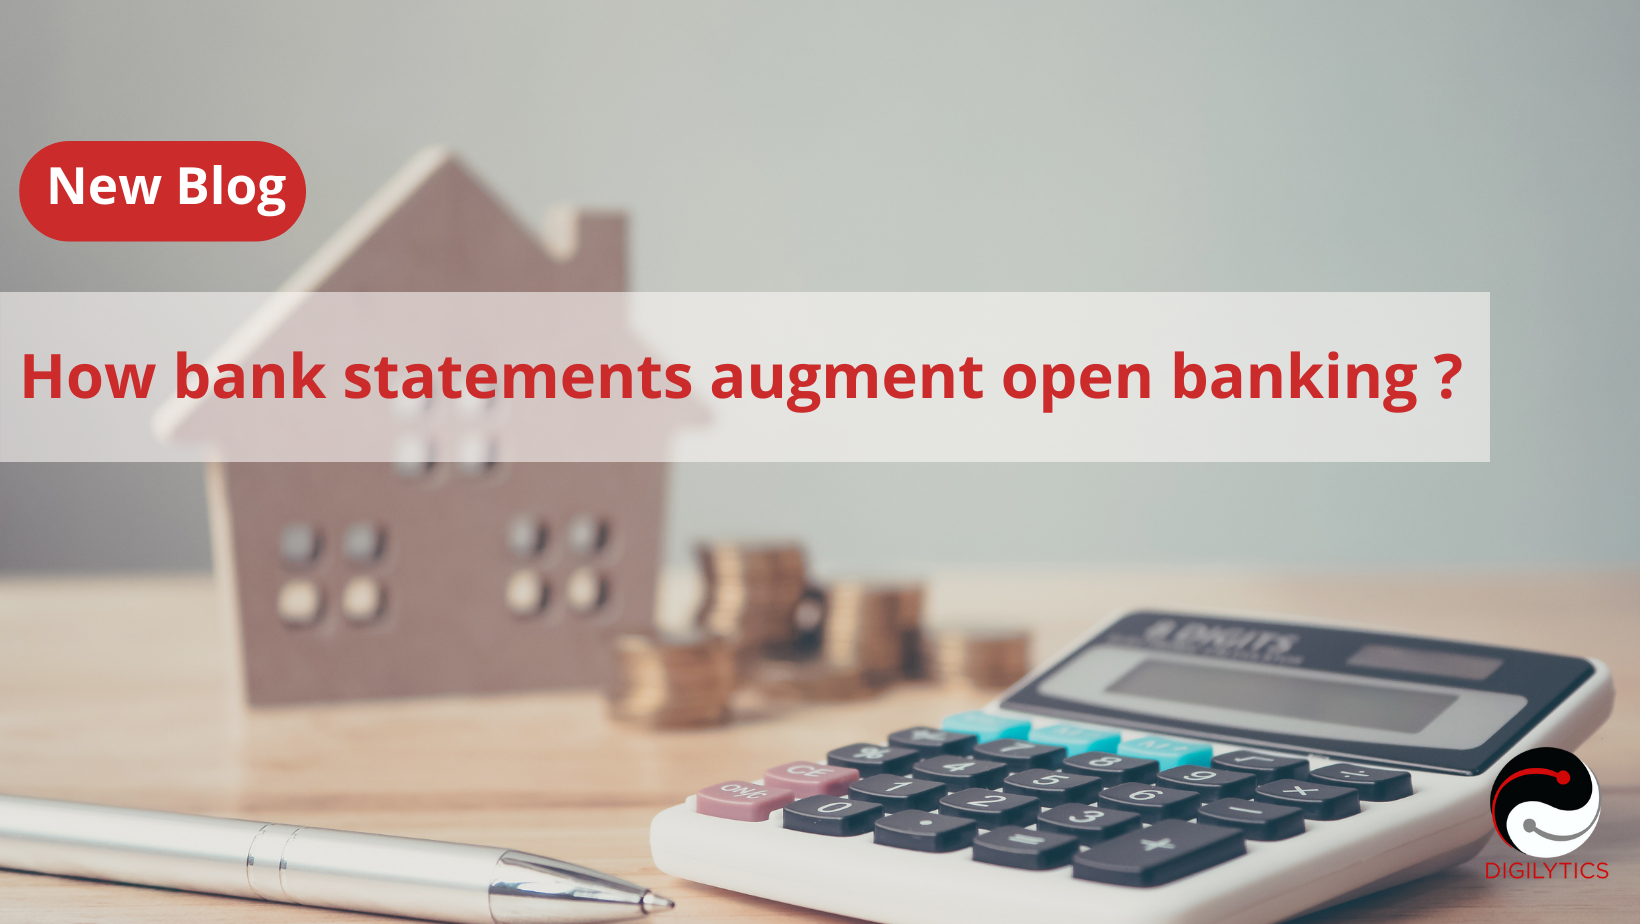 How Do Banks Augment Open Banking?